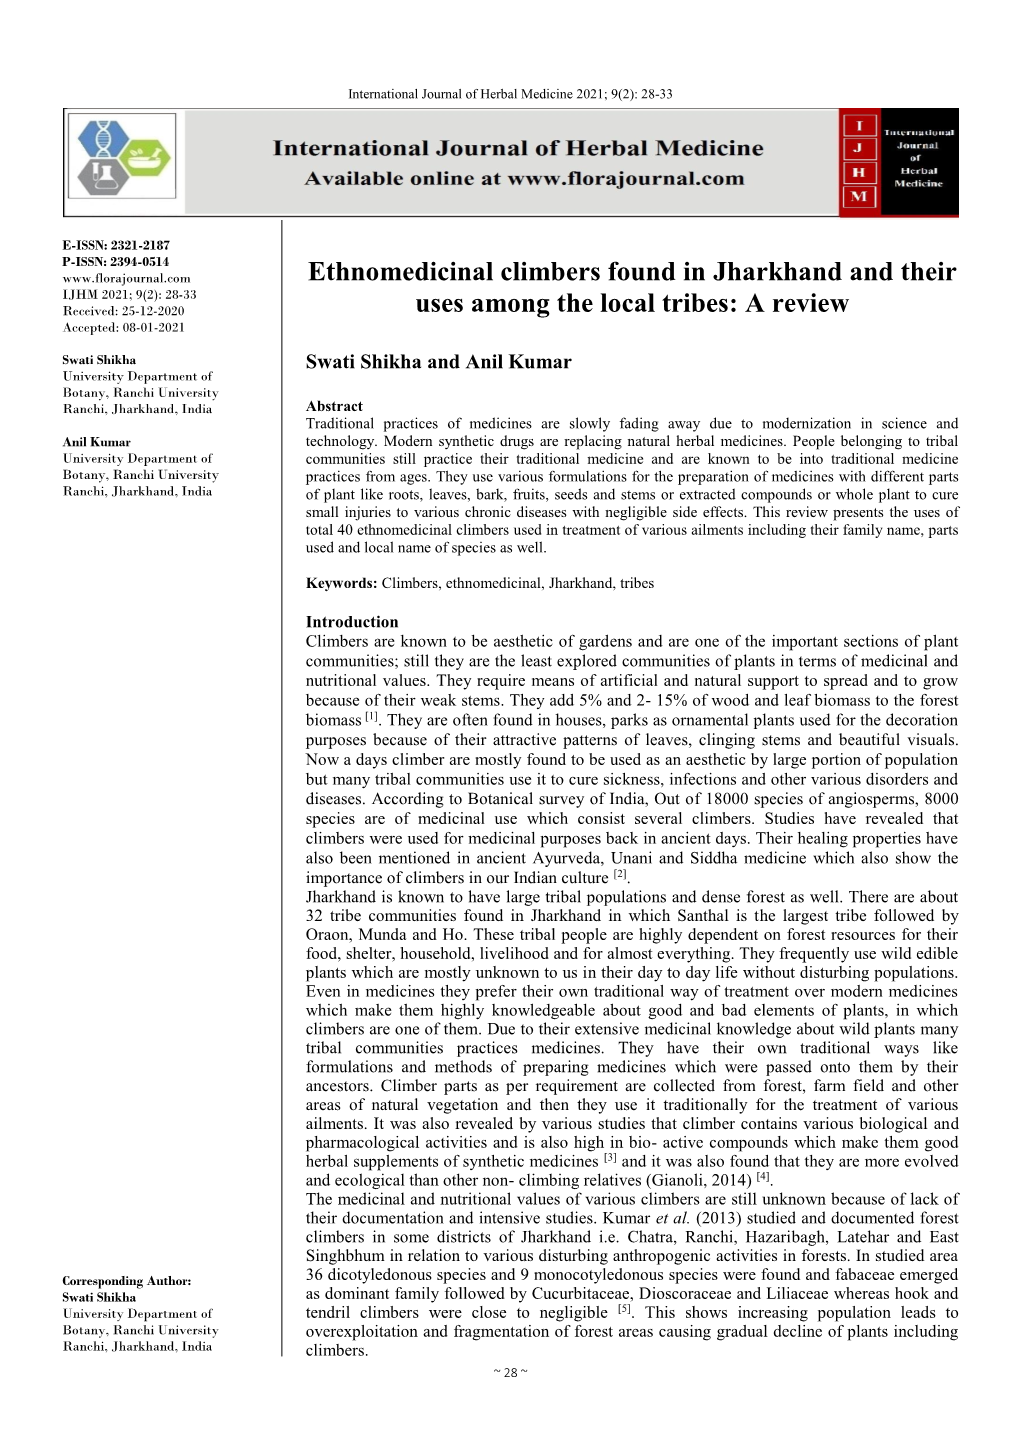 Ethnomedicinal Climbers Found in Jharkhand and Their Uses Among the Local Tribes